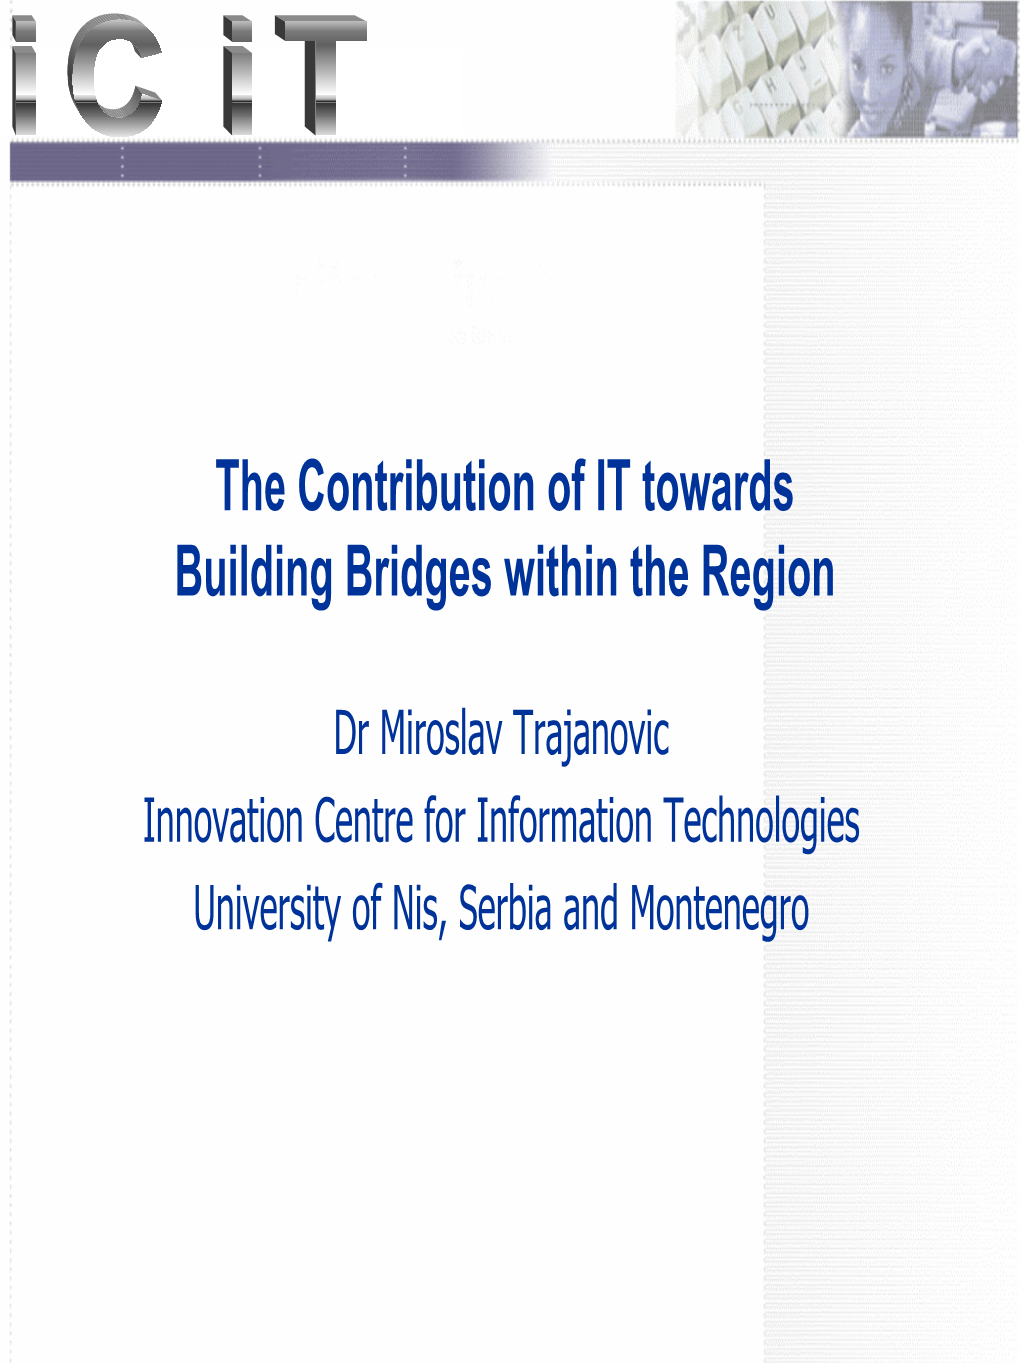 The Contribution of IT Towards Building Bridges Within the Region